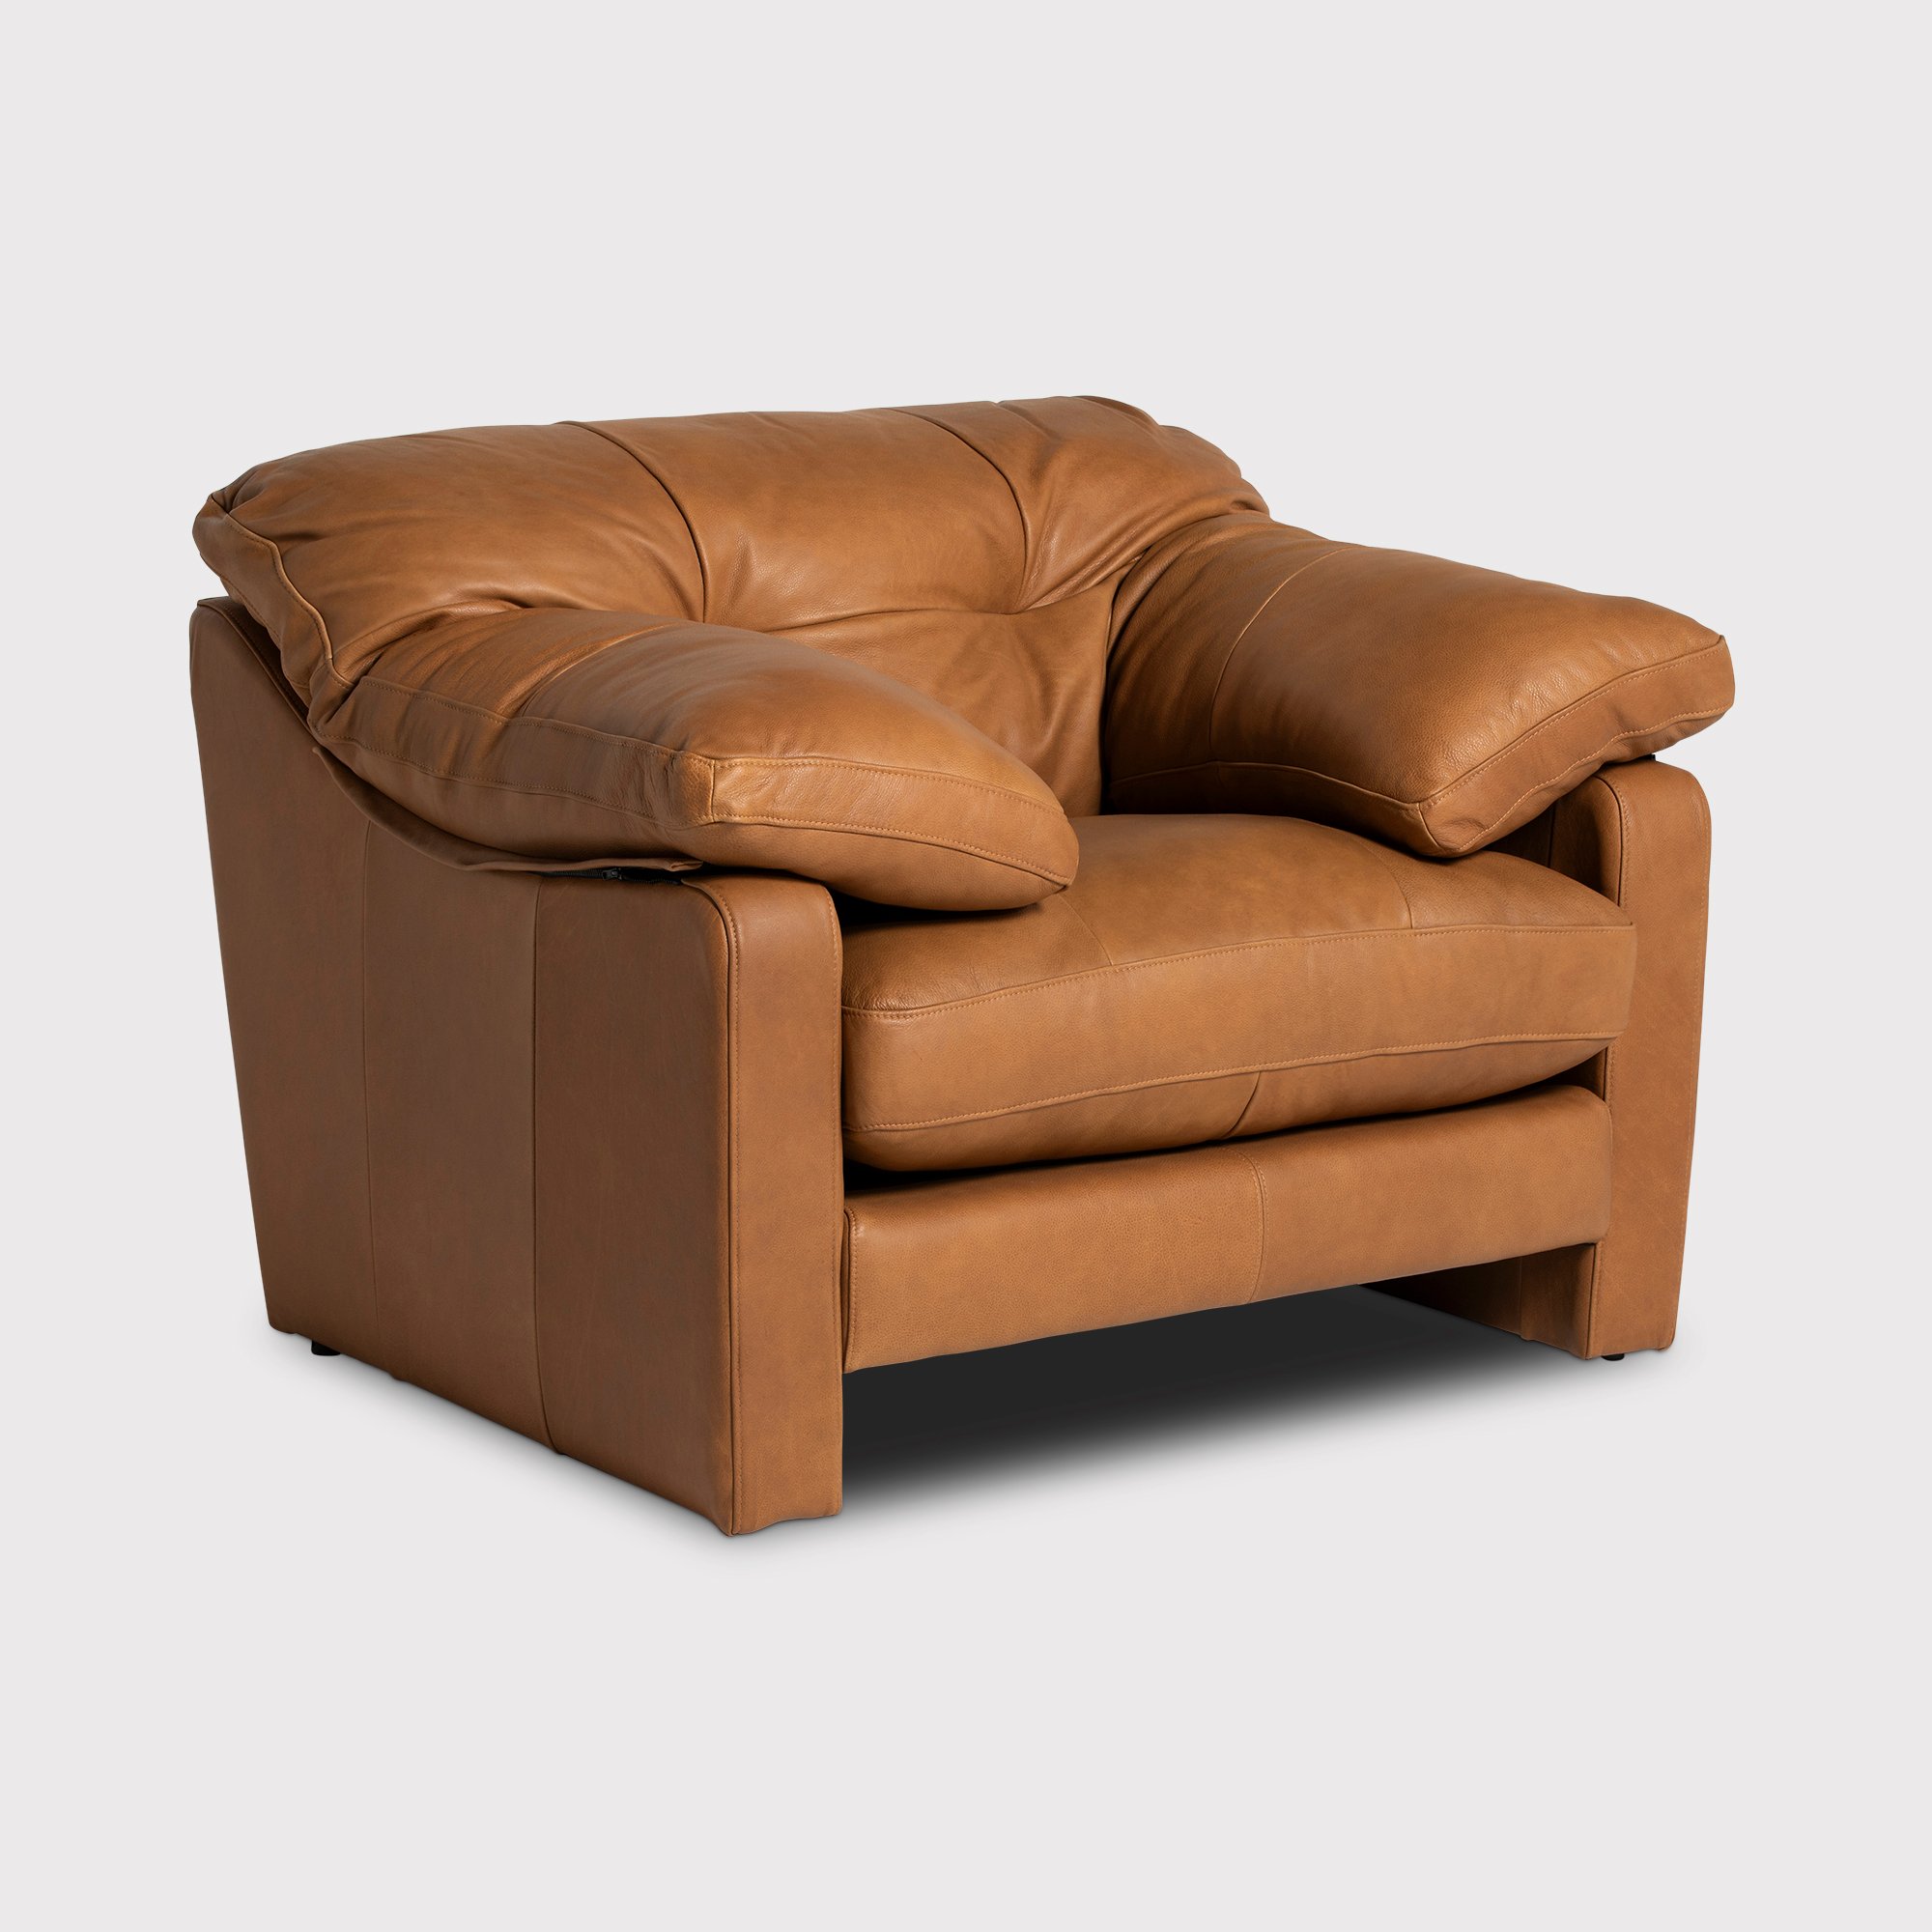 Penley Lounge Chair, Brown | Barker & Stonehouse